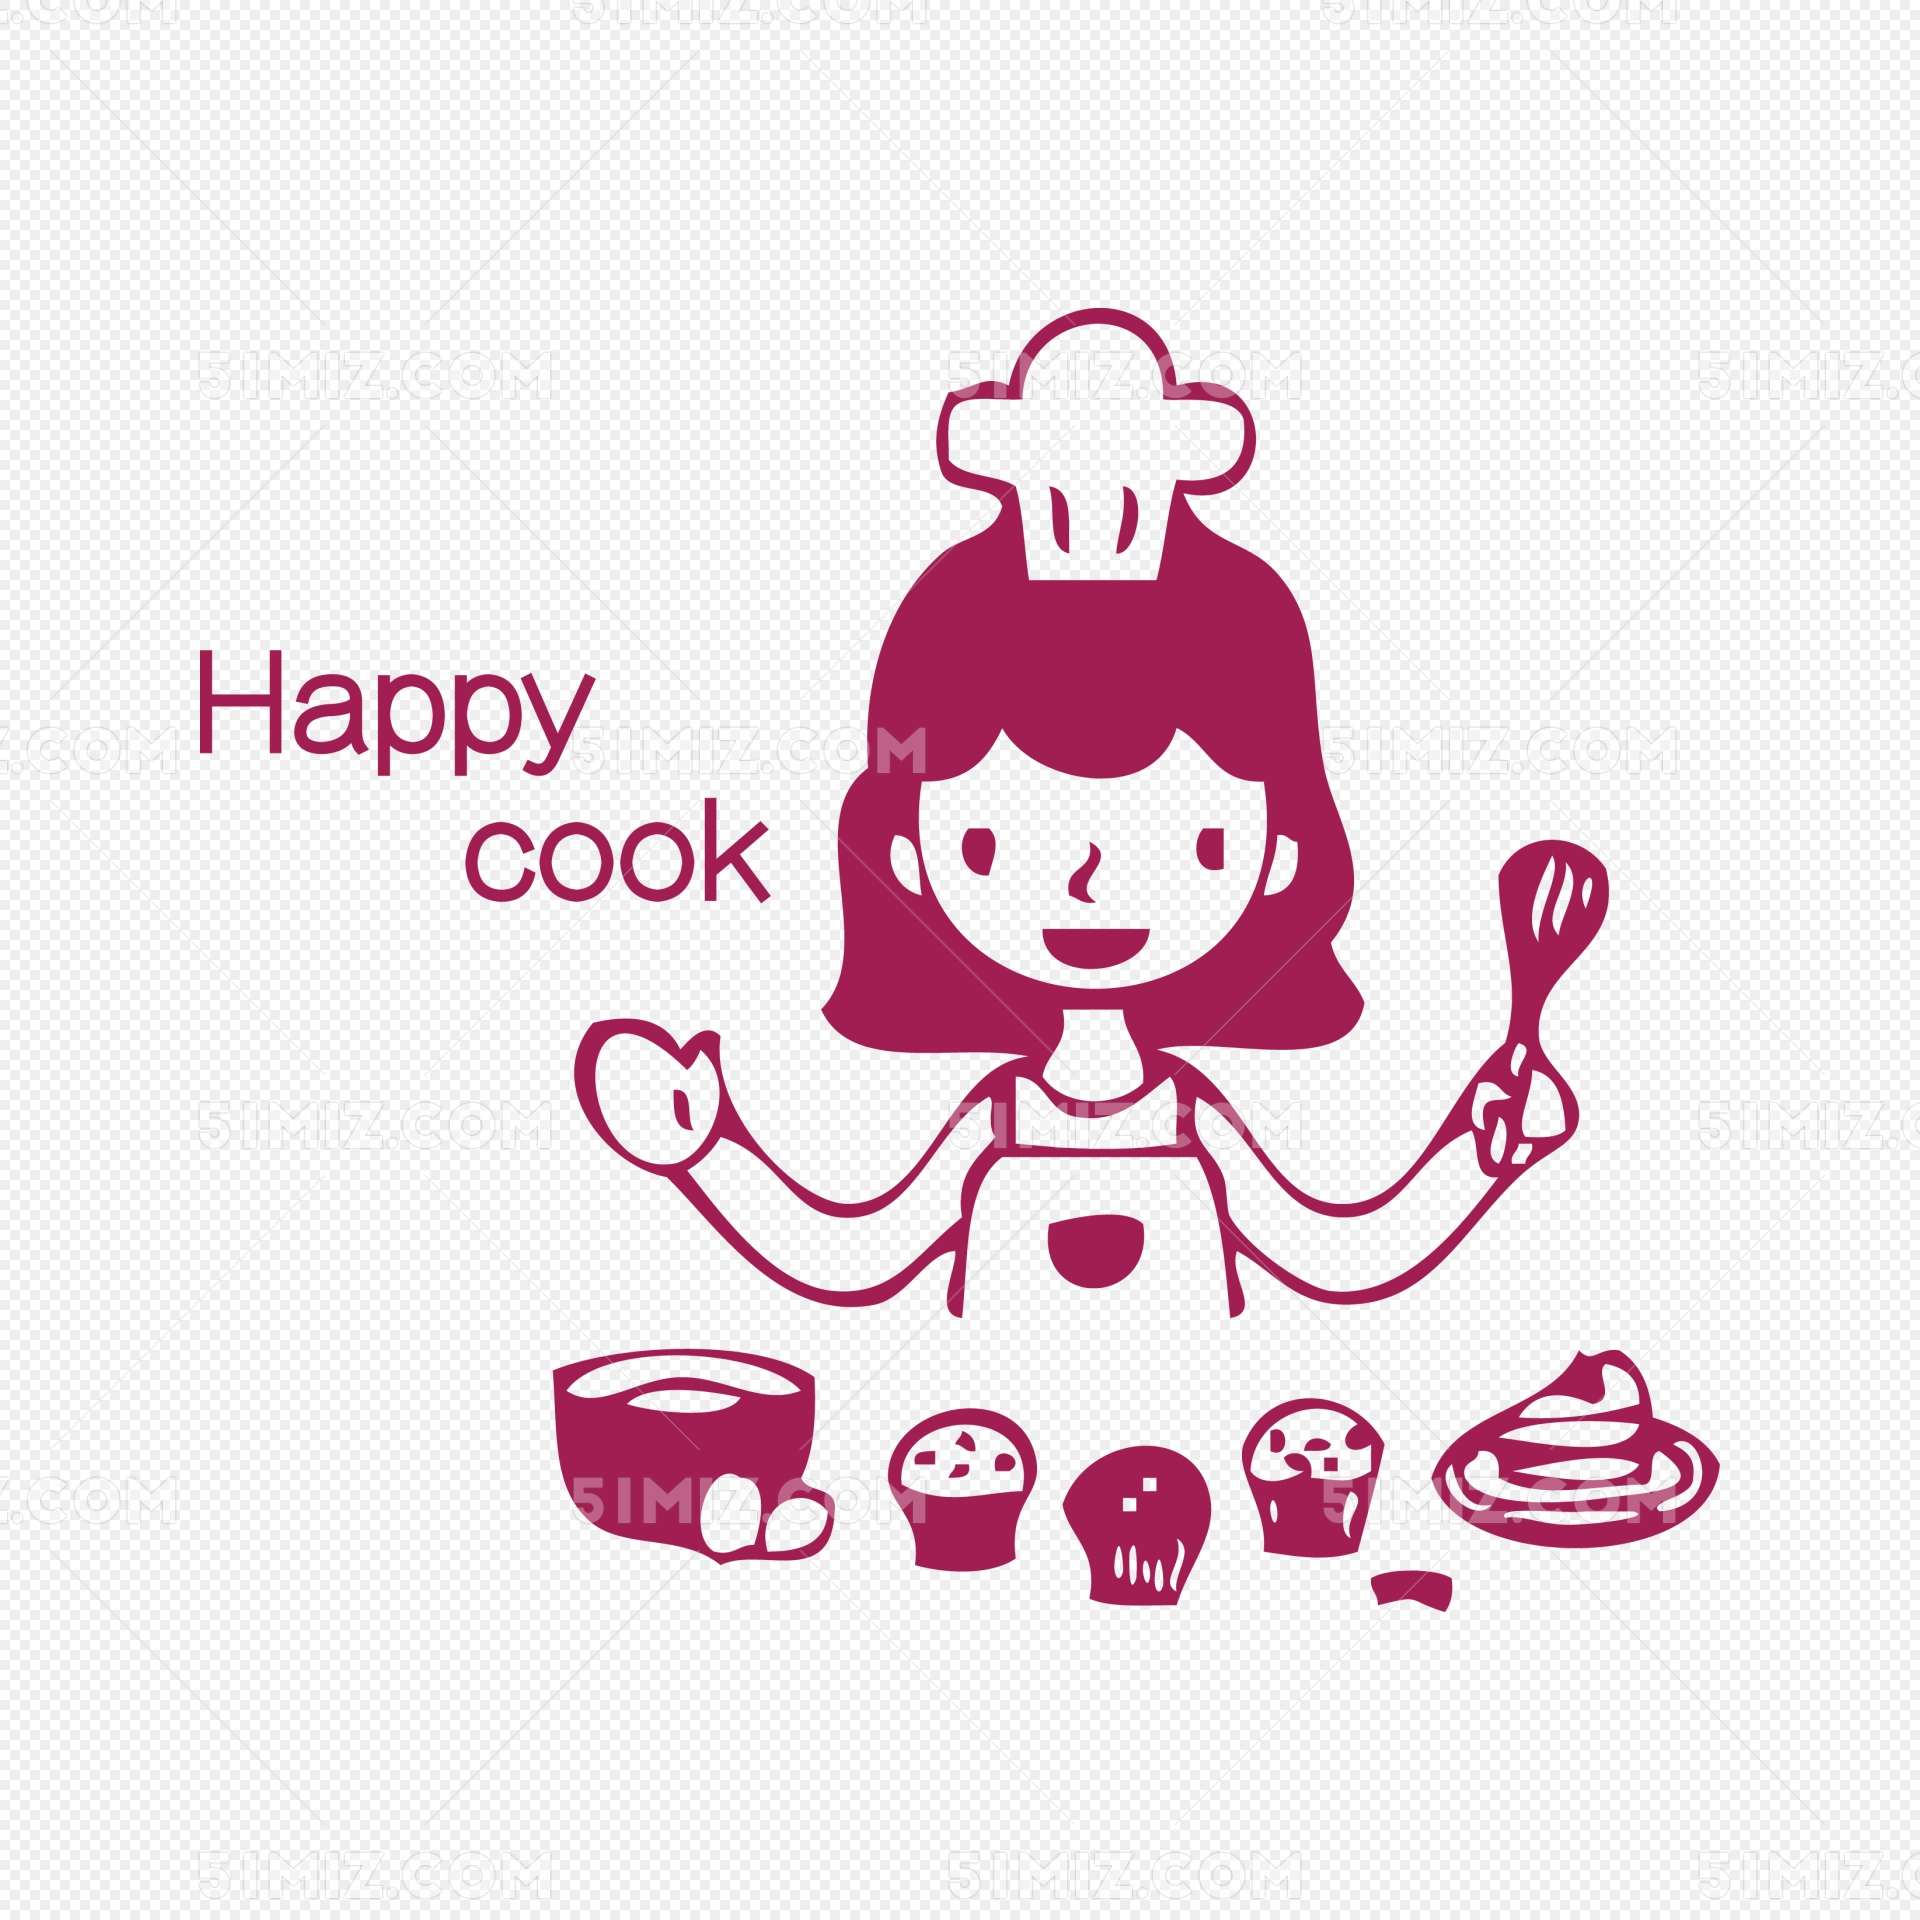 The little bakery girl chef is happy and smiling, tasty and sweet smile ...